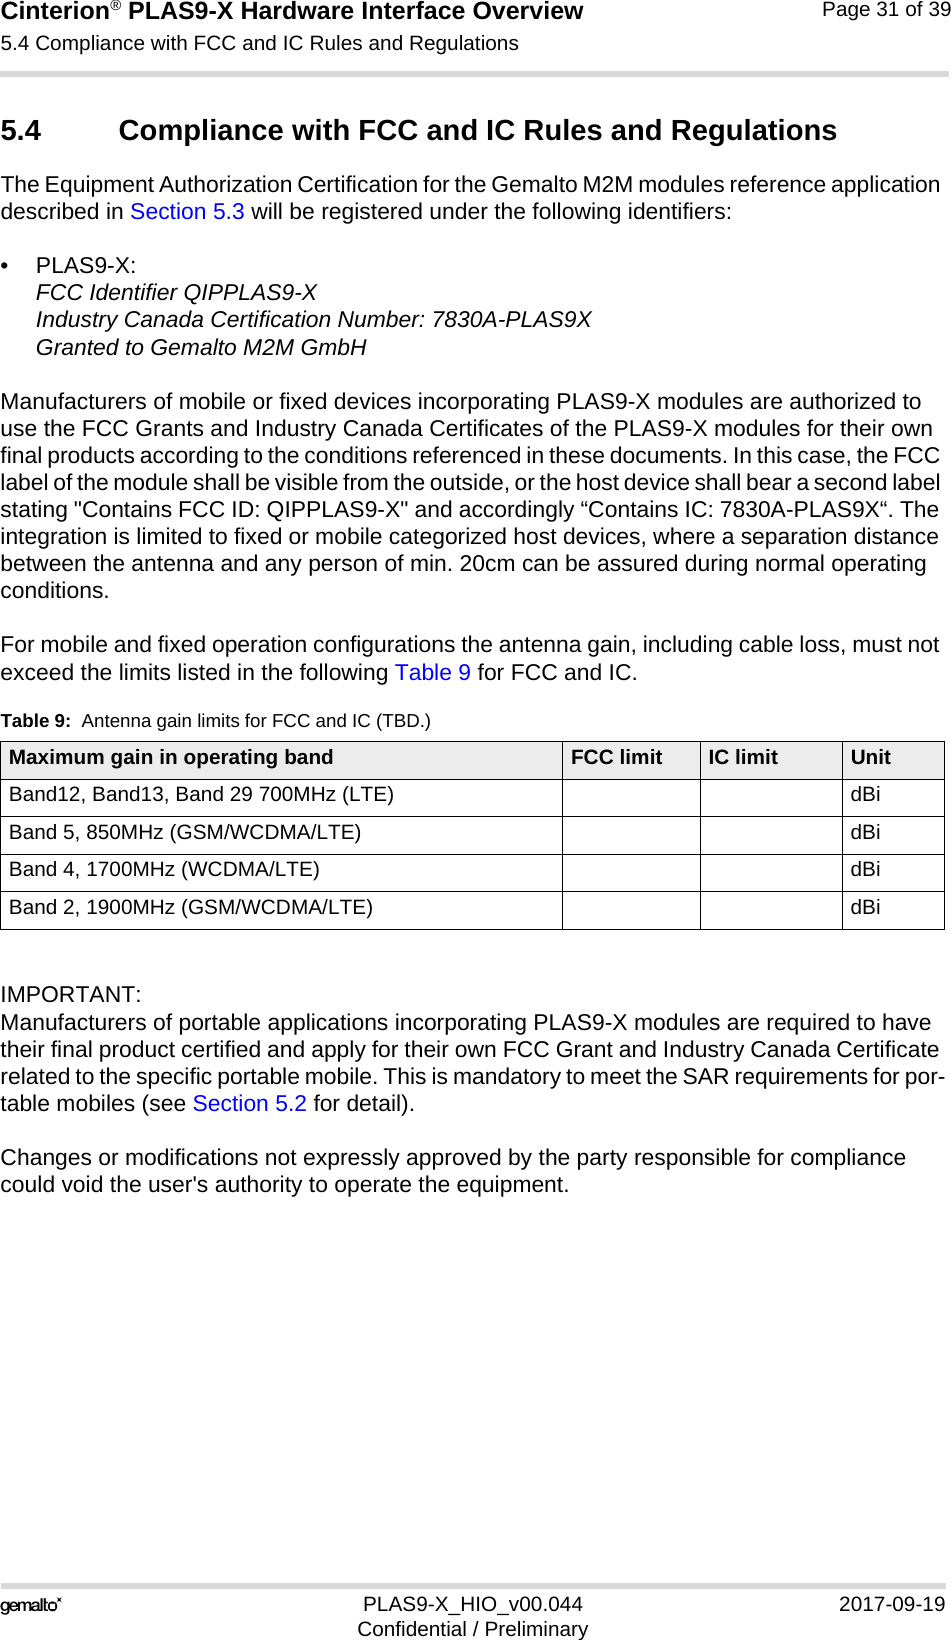 Cinterion® PLAS9-X Hardware Interface Overview5.4 Compliance with FCC and IC Rules and Regulations32PLAS9-X_HIO_v00.044 2017-09-19Confidential / PreliminaryPage 31 of 395.4 Compliance with FCC and IC Rules and Regulations The Equipment Authorization Certification for the Gemalto M2M modules reference application described in Section 5.3 will be registered under the following identifiers:•PLAS9-X:FCC Identifier QIPPLAS9-XIndustry Canada Certification Number: 7830A-PLAS9XGranted to Gemalto M2M GmbH Manufacturers of mobile or fixed devices incorporating PLAS9-X modules are authorized to use the FCC Grants and Industry Canada Certificates of the PLAS9-X modules for their own final products according to the conditions referenced in these documents. In this case, the FCC label of the module shall be visible from the outside, or the host device shall bear a second label stating &quot;Contains FCC ID: QIPPLAS9-X&quot; and accordingly “Contains IC: 7830A-PLAS9X“. The integration is limited to fixed or mobile categorized host devices, where a separation distance between the antenna and any person of min. 20cm can be assured during normal operating conditions. For mobile and fixed operation configurations the antenna gain, including cable loss, must not exceed the limits listed in the following Table 9 for FCC and IC.IMPORTANT:Manufacturers of portable applications incorporating PLAS9-X modules are required to have their final product certified and apply for their own FCC Grant and Industry Canada Certificate related to the specific portable mobile. This is mandatory to meet the SAR requirements for por-table mobiles (see Section 5.2 for detail).Changes or modifications not expressly approved by the party responsible for compliance could void the user&apos;s authority to operate the equipment.Table 9:  Antenna gain limits for FCC and IC (TBD.)Maximum gain in operating band FCC limit IC limit UnitBand12, Band13, Band 29 700MHz (LTE) dBiBand 5, 850MHz (GSM/WCDMA/LTE) dBiBand 4, 1700MHz (WCDMA/LTE) dBiBand 2, 1900MHz (GSM/WCDMA/LTE) dBi